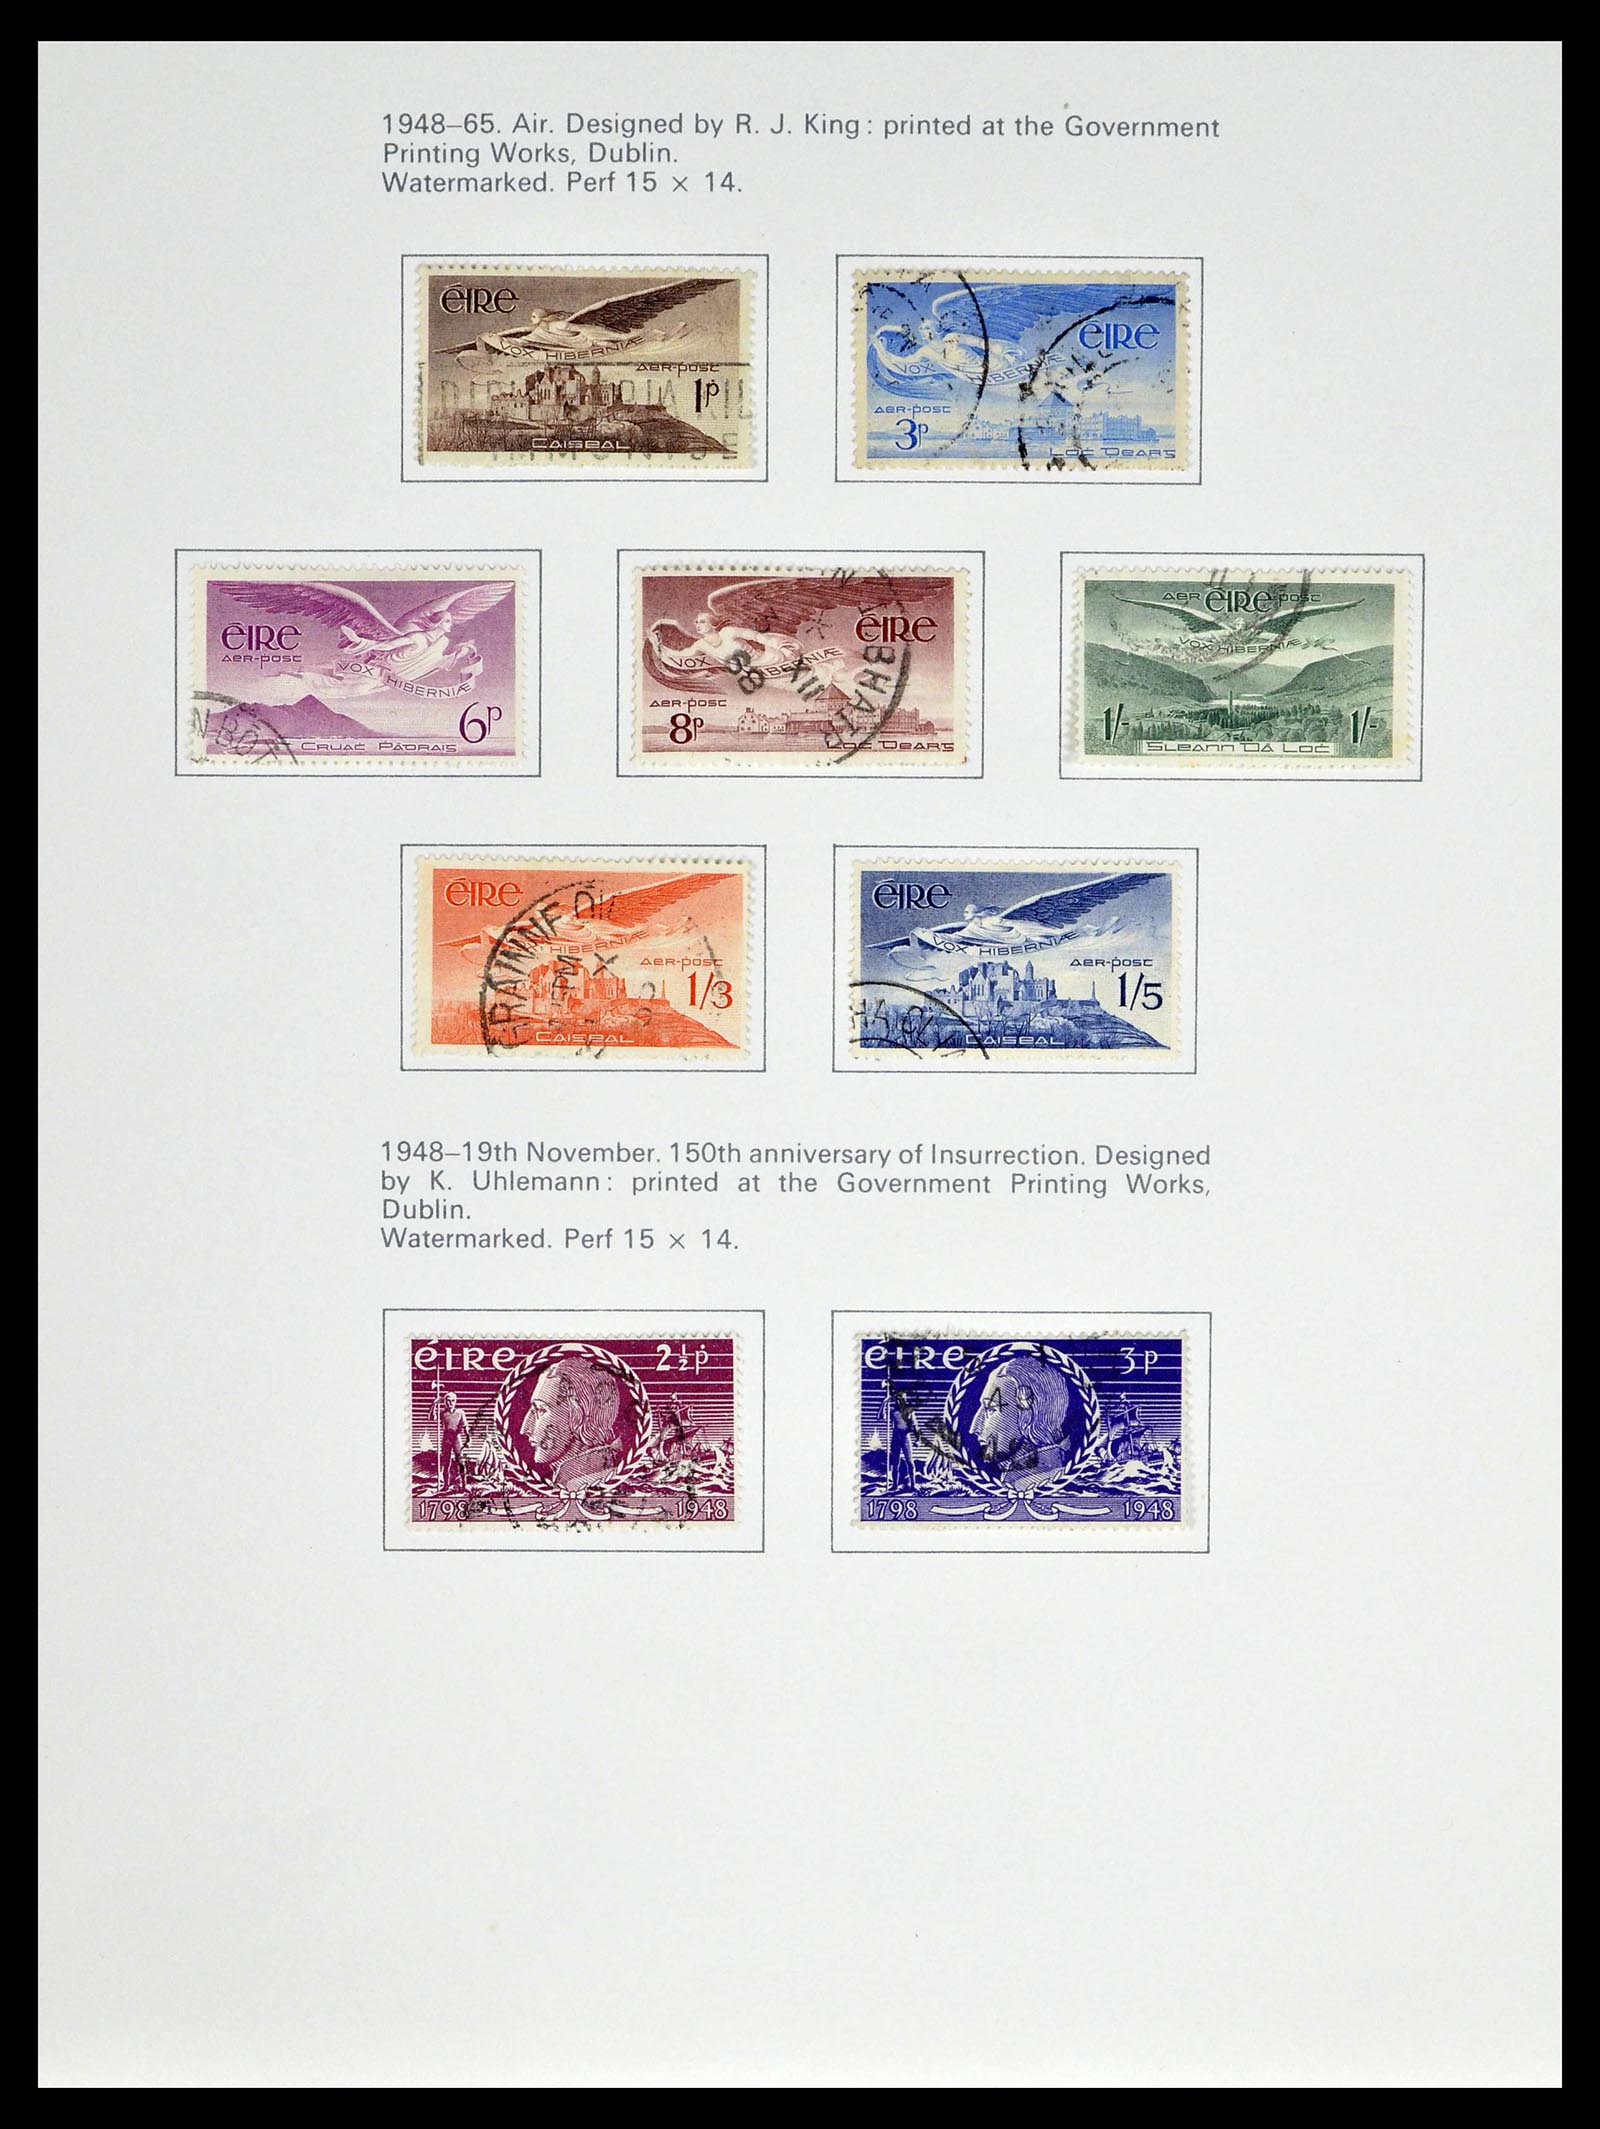 39173 0005 - Stamp collection 39173 Ireland 1937-1979.